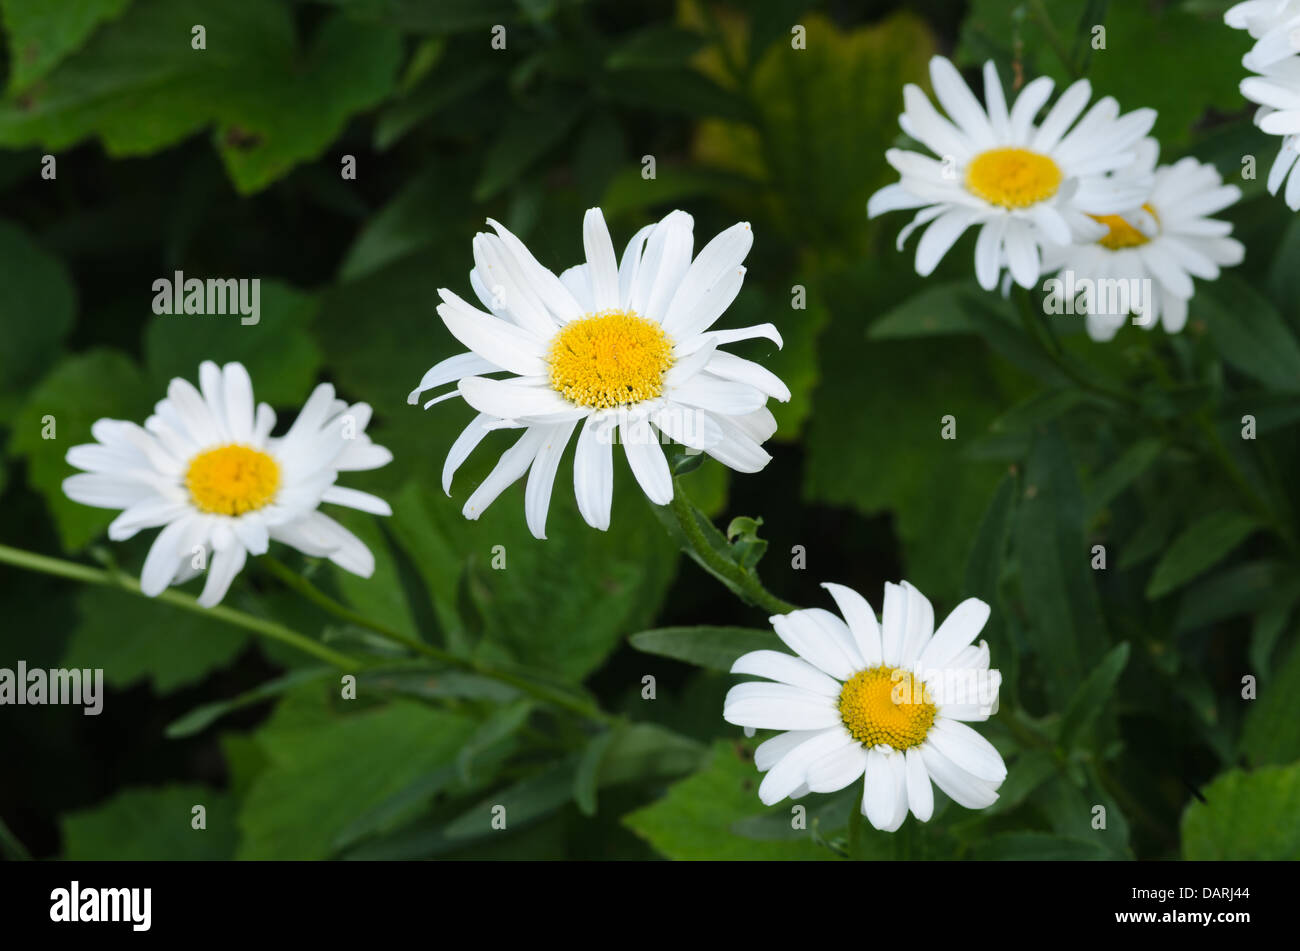 ox eye daisies Leucanthemum vulgare compositae flowers radiating out from center Stock Photo